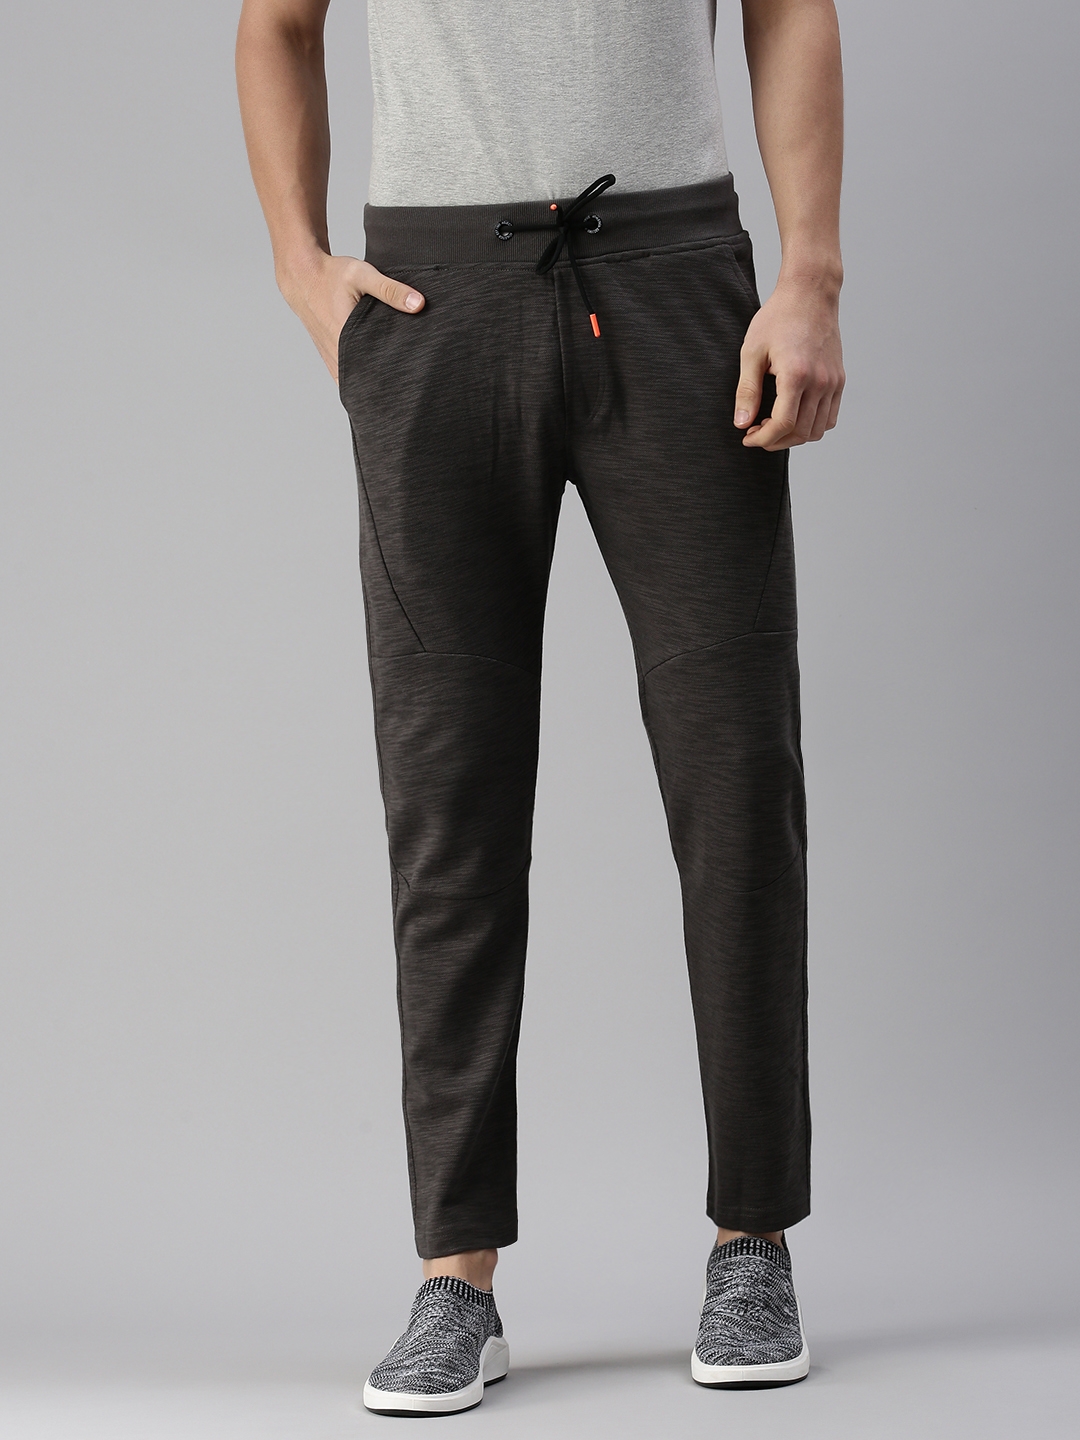 Showoff | SHOWOFF Men's Solid Cotton Grey Straight Fit Track Pants